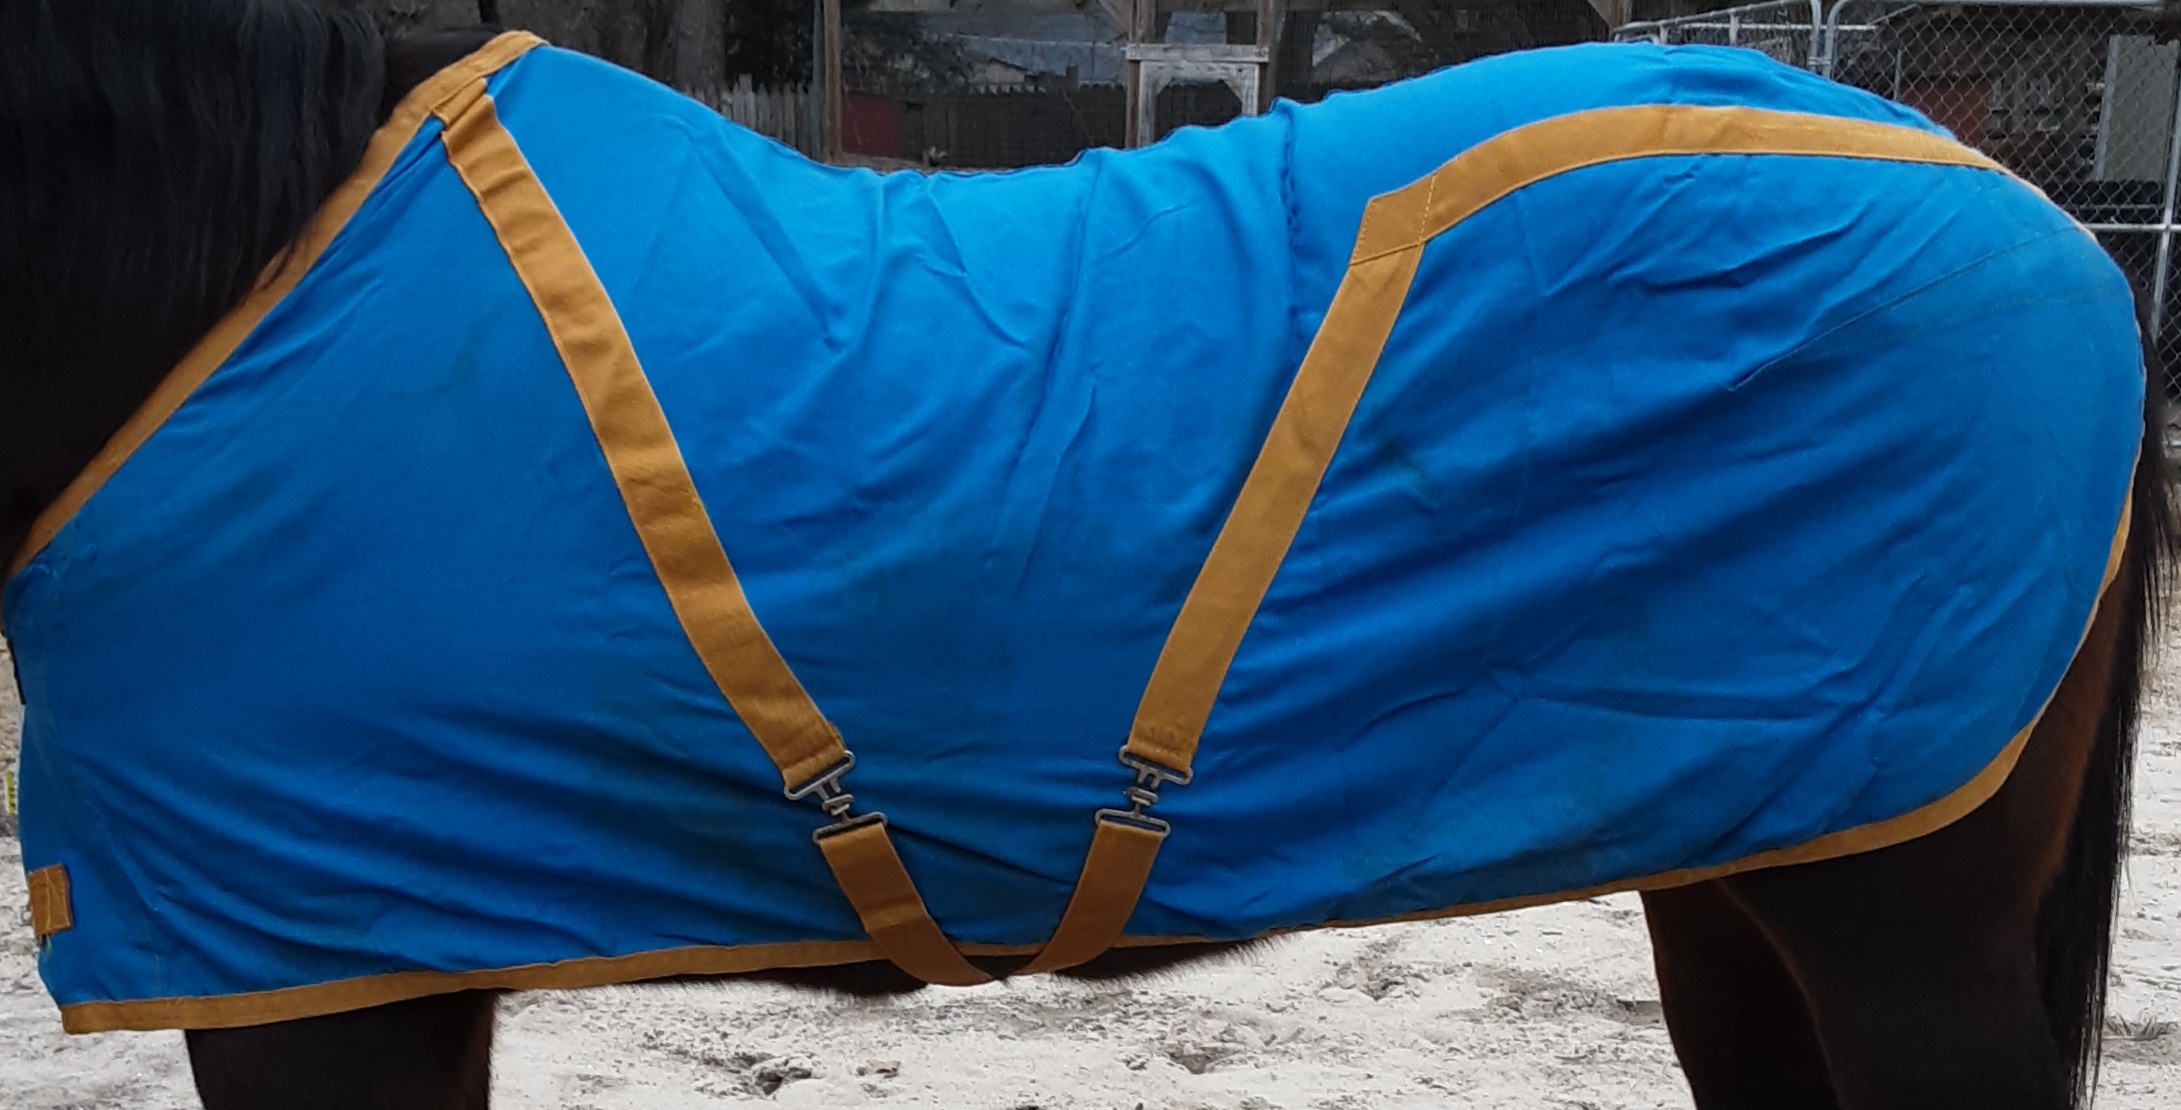 72" - 74” OF Stable Sheet Horse Blue/Gold